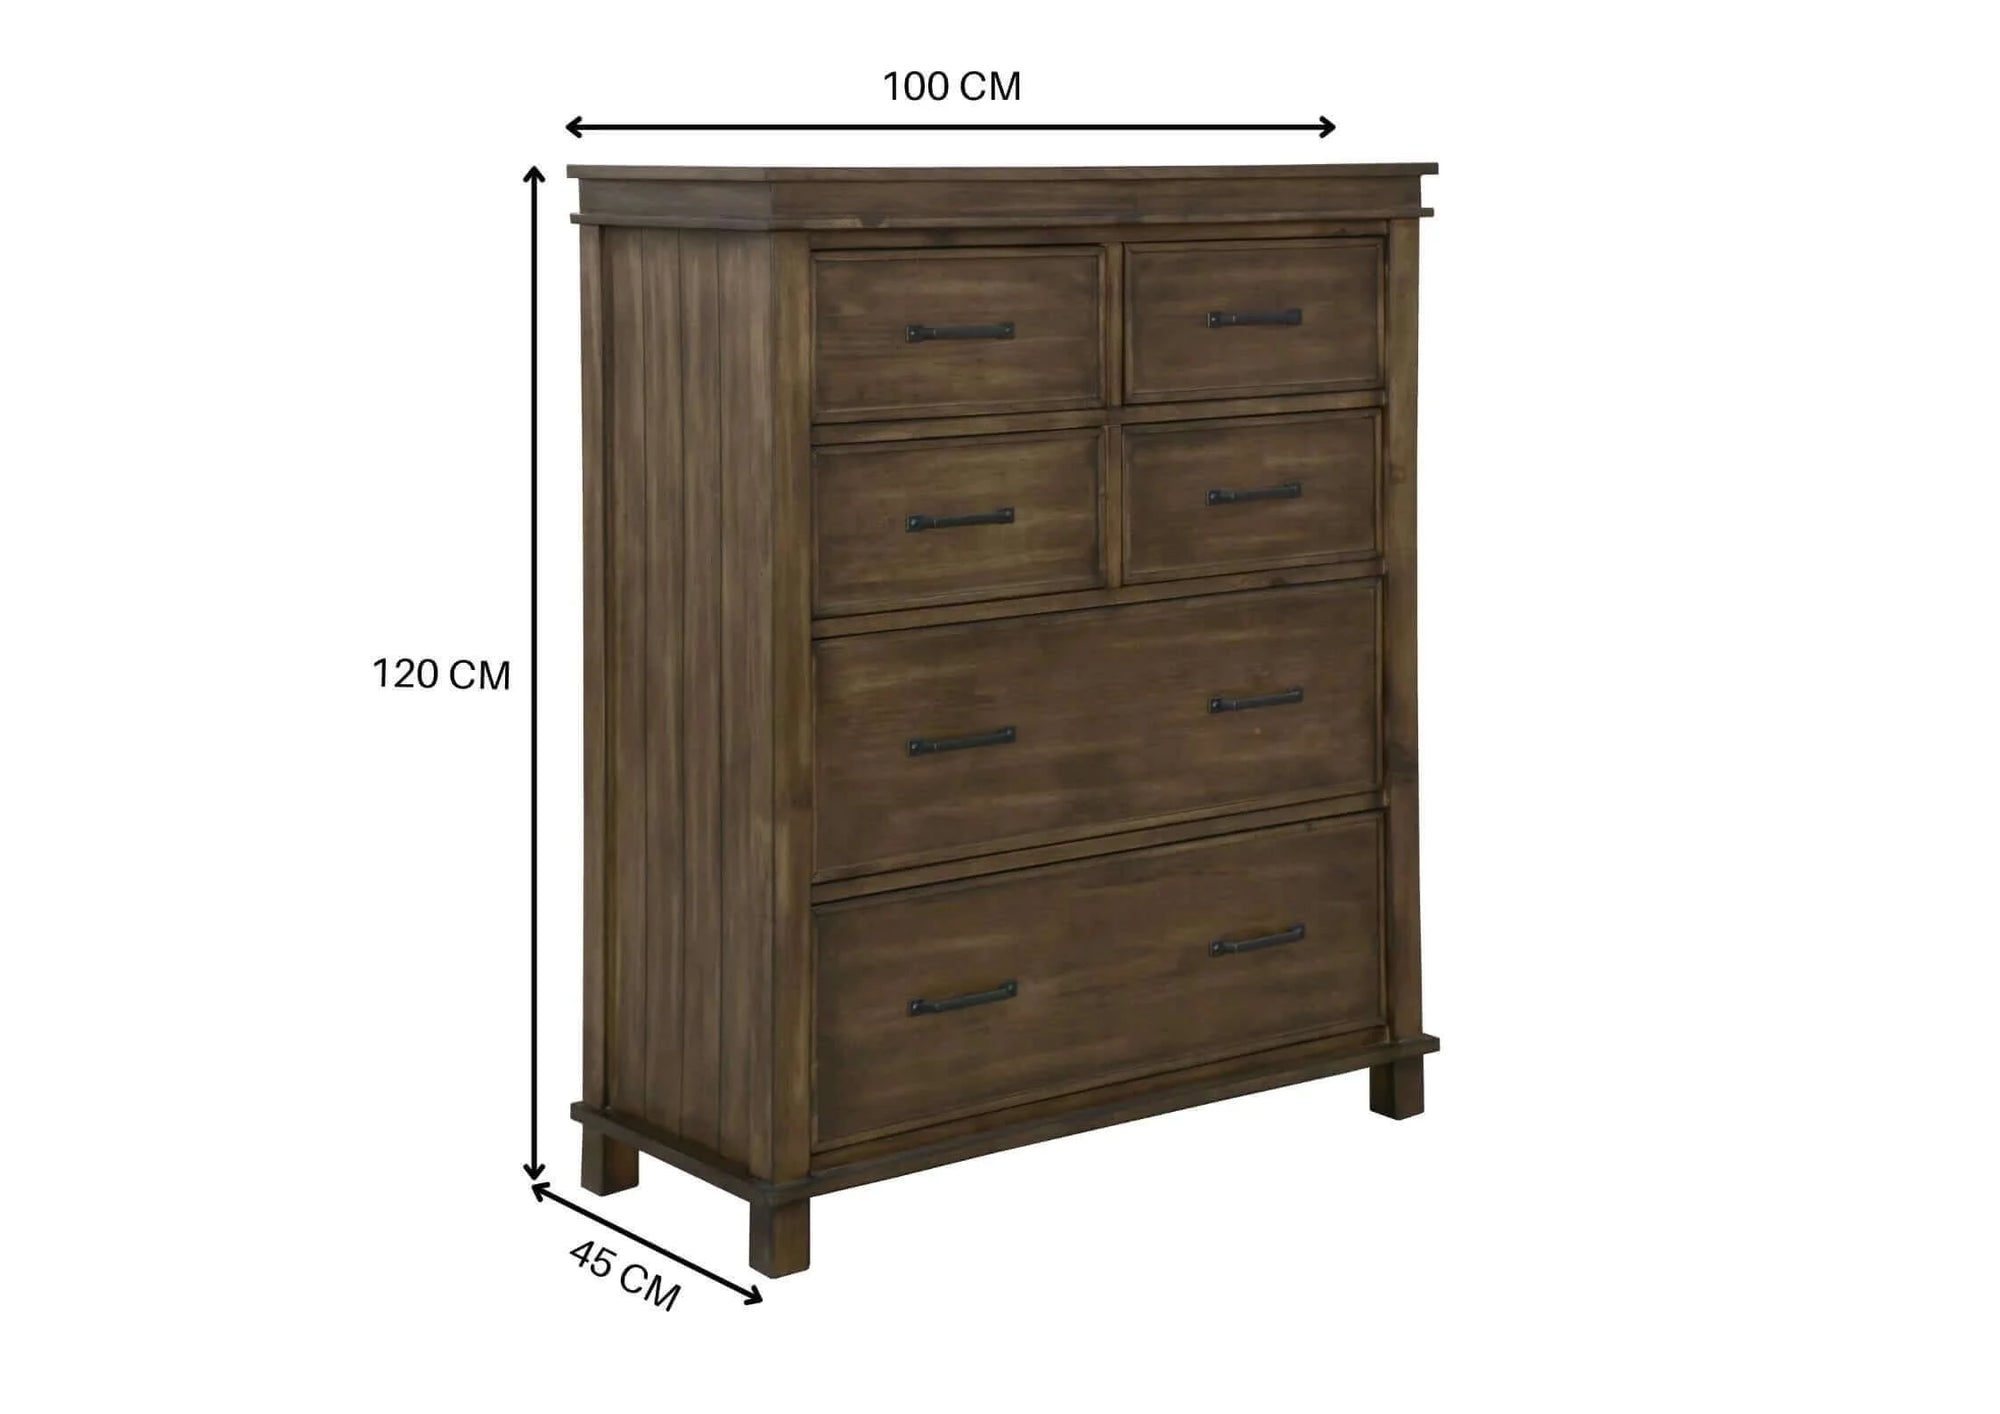 Buy lily 4pc queen bed suite bedside tallboy bedroom furniture package - rustic grey - upinteriors-Upinteriors